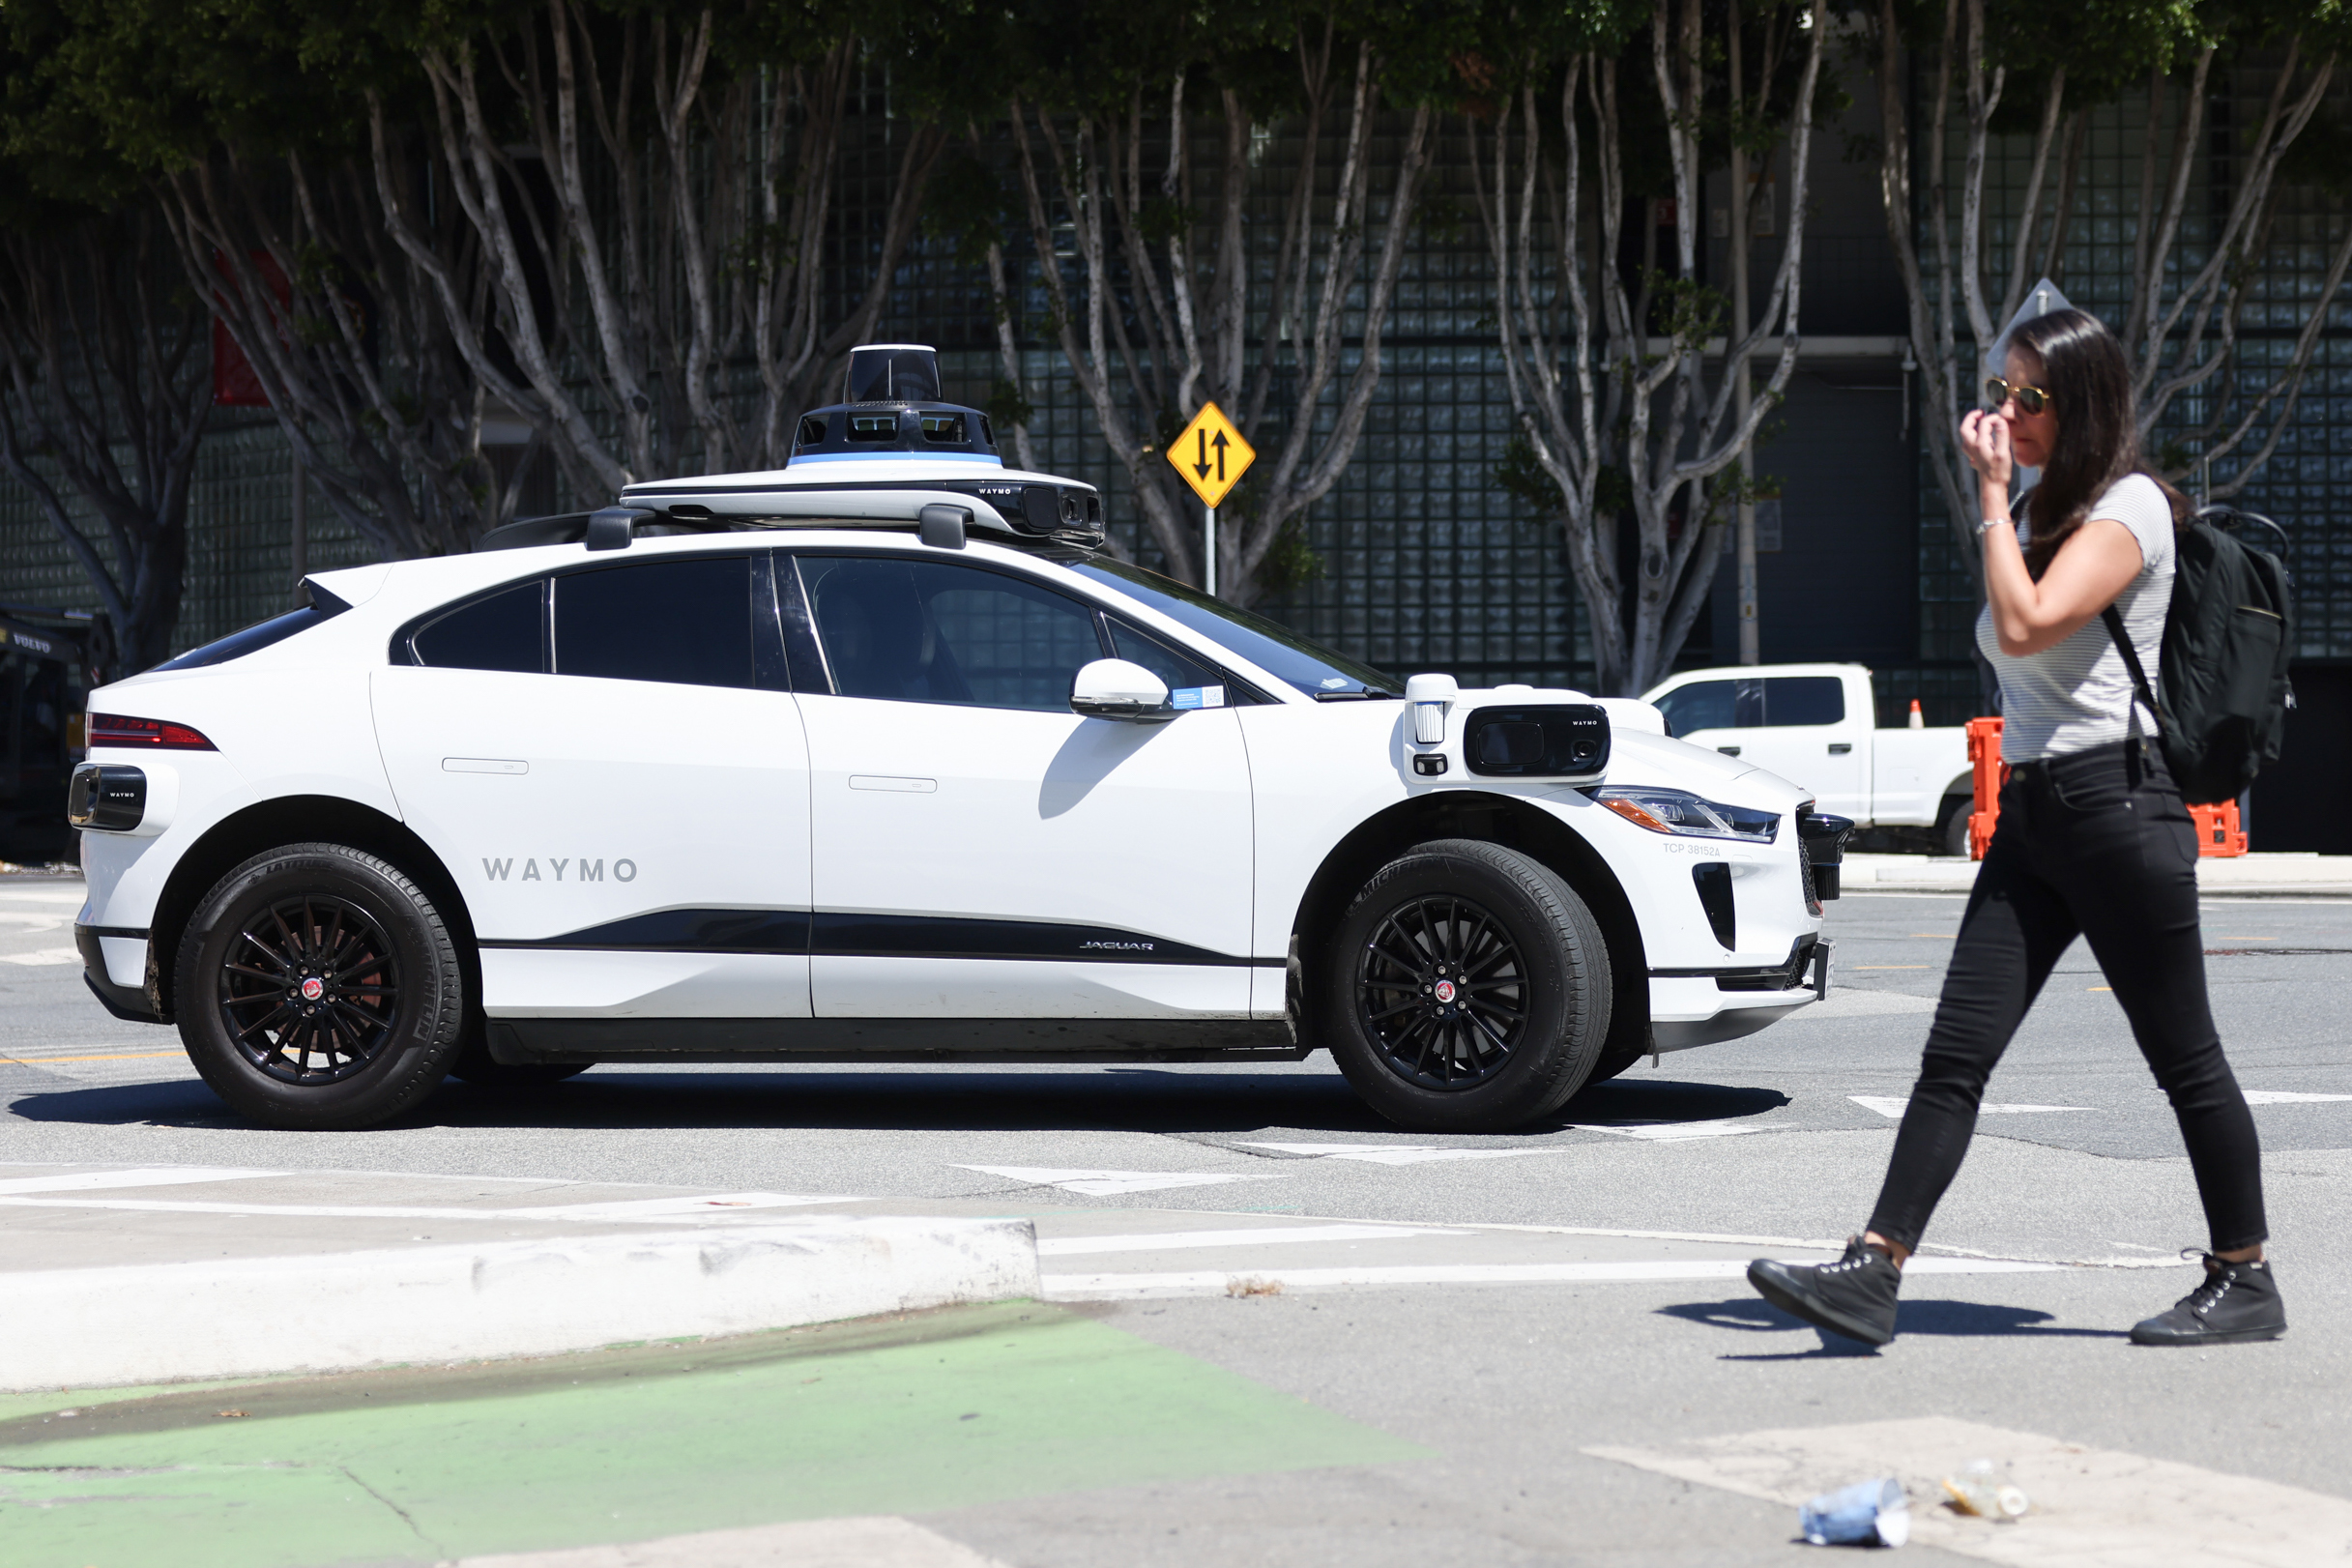 A Waymo self-driving car and a pedestrian crossing the street.